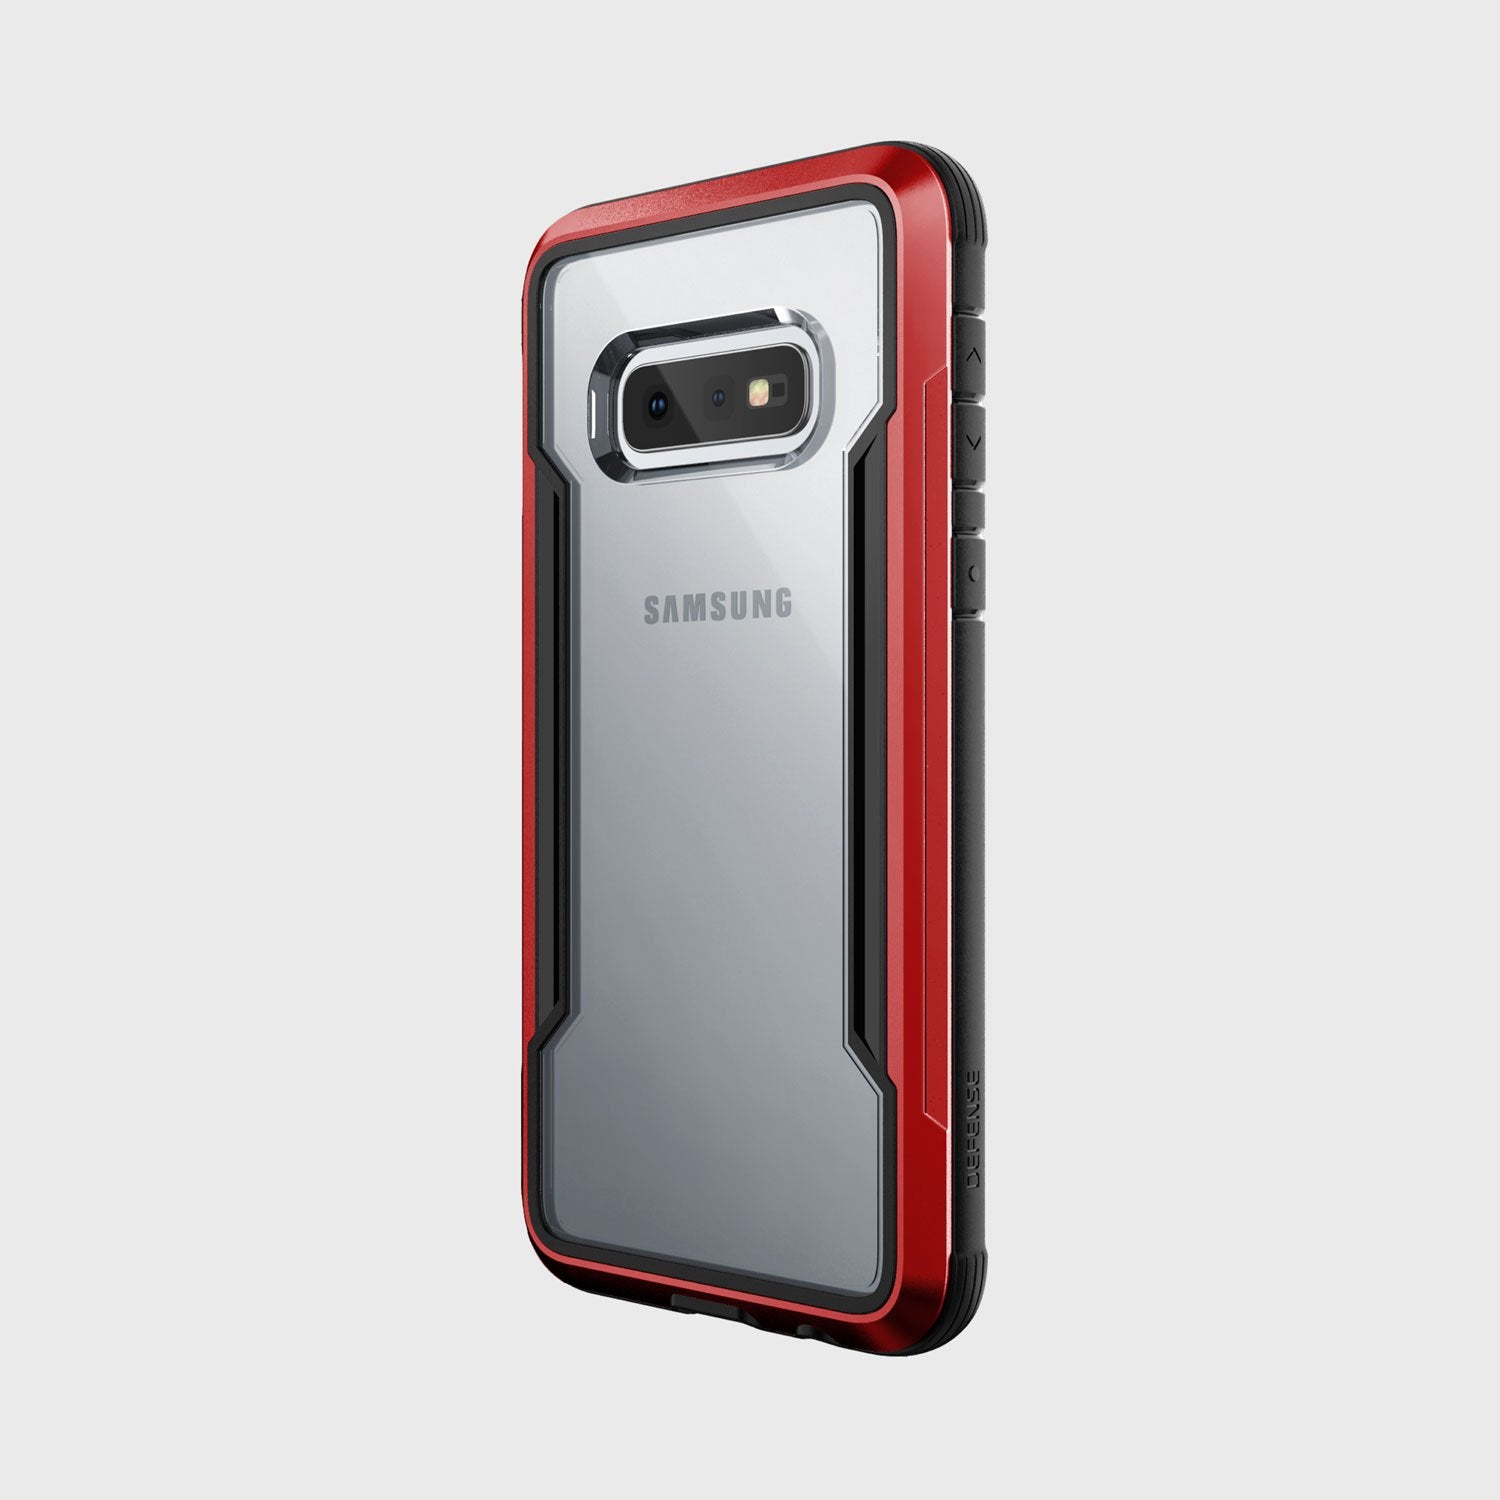 This Red and Black X-Doria Samsung Galaxy S10e Case Raptic Shield Red provides drop protection for your phone.